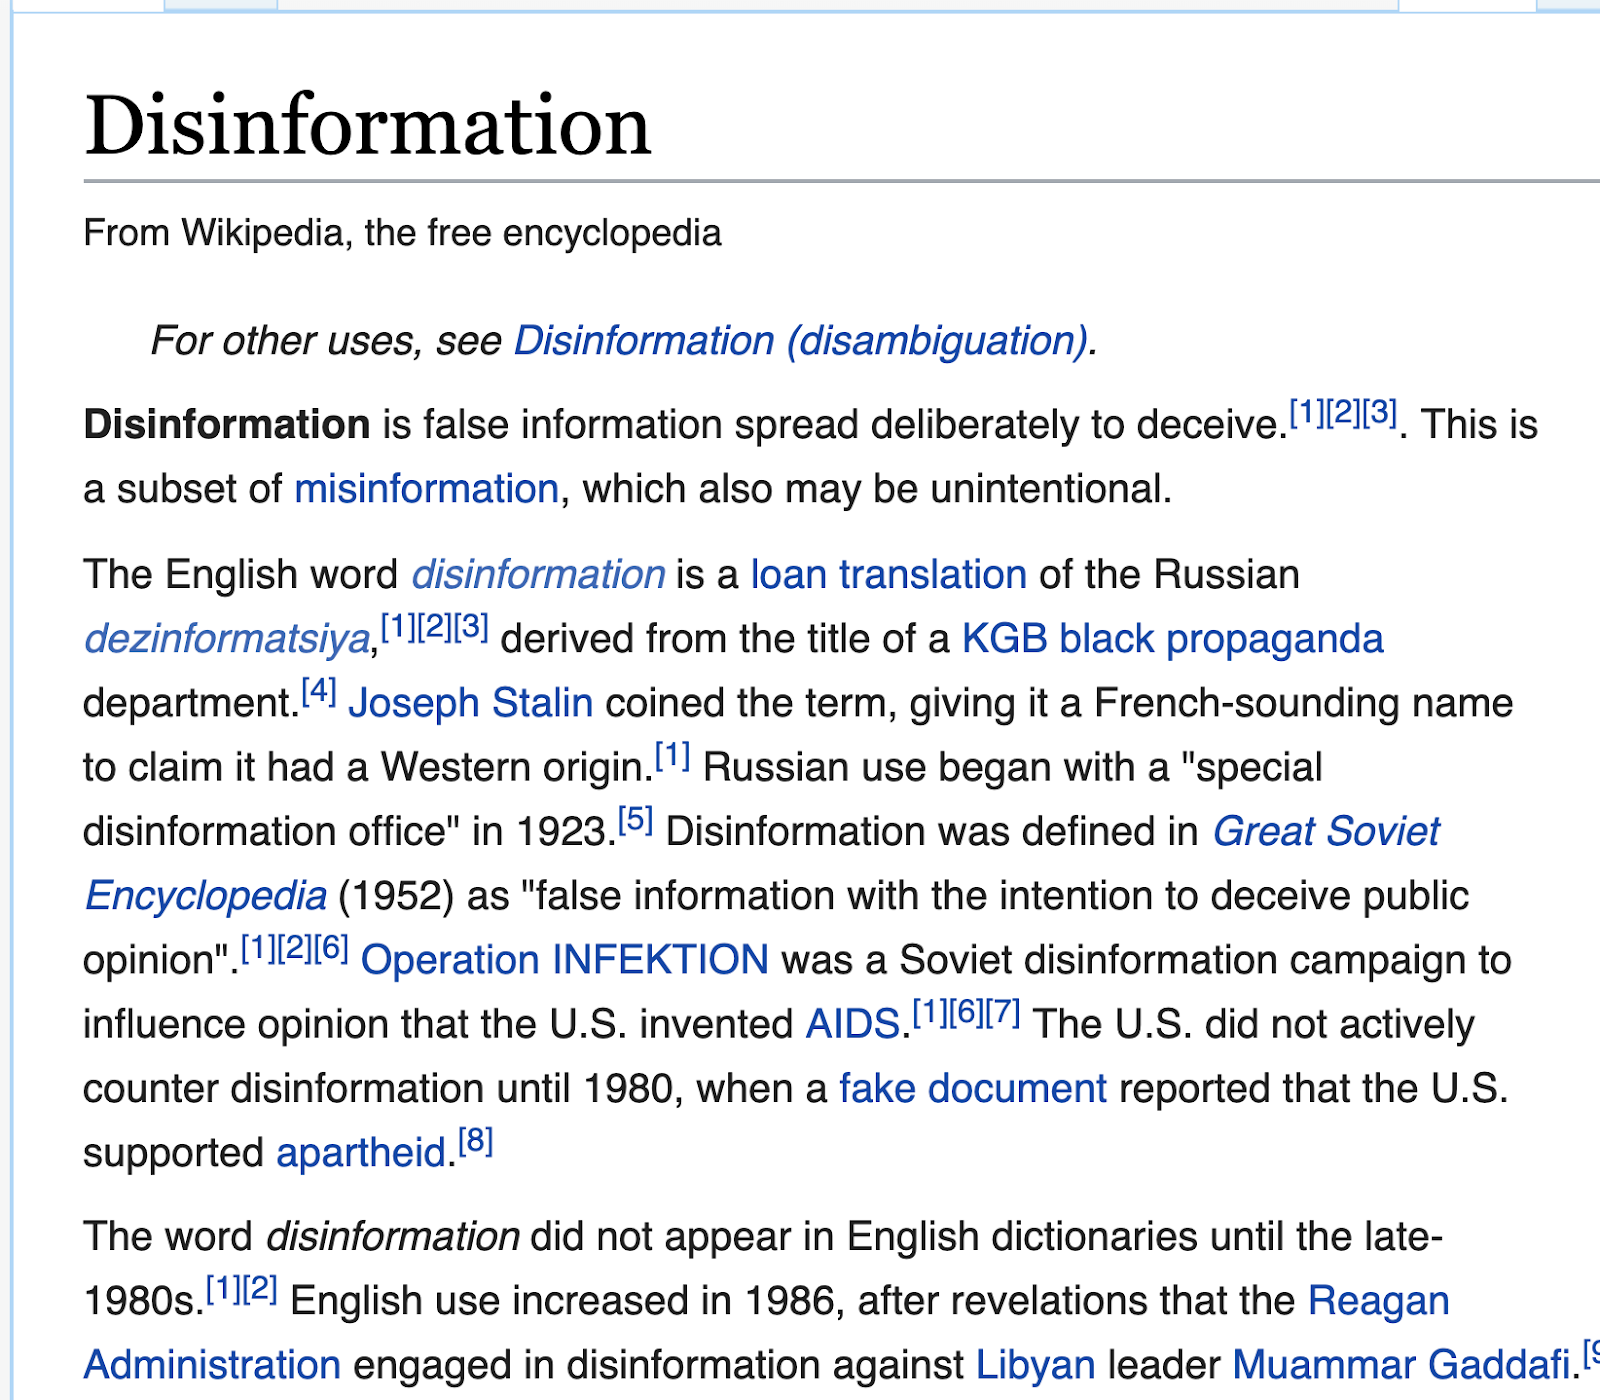 Excerpt from the Wikipedia article on Disinformation